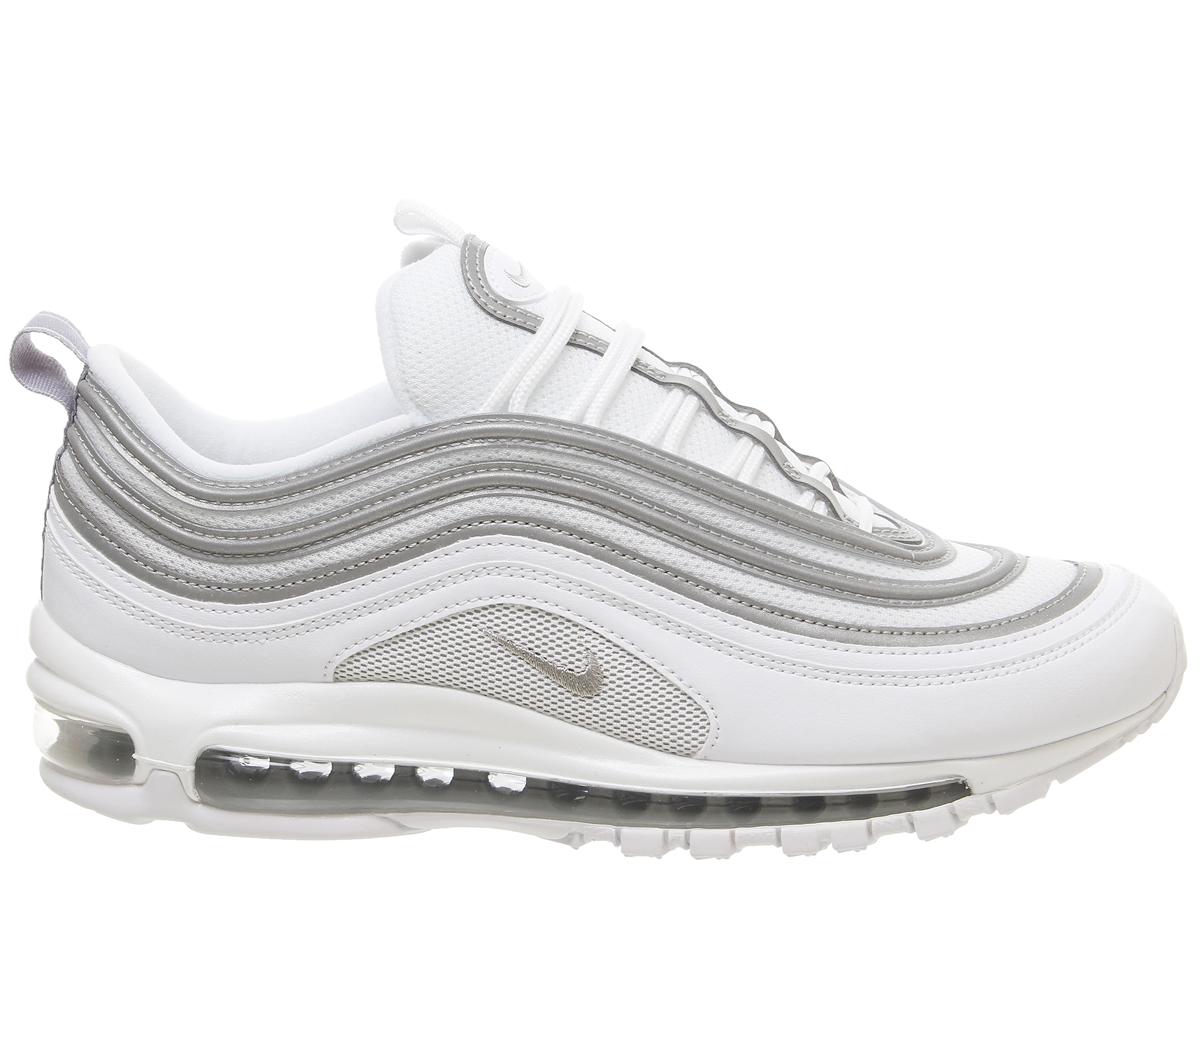 Nike Air Max 97 Trainers White Reflect Silver Wolf Grey - Sneaker herren